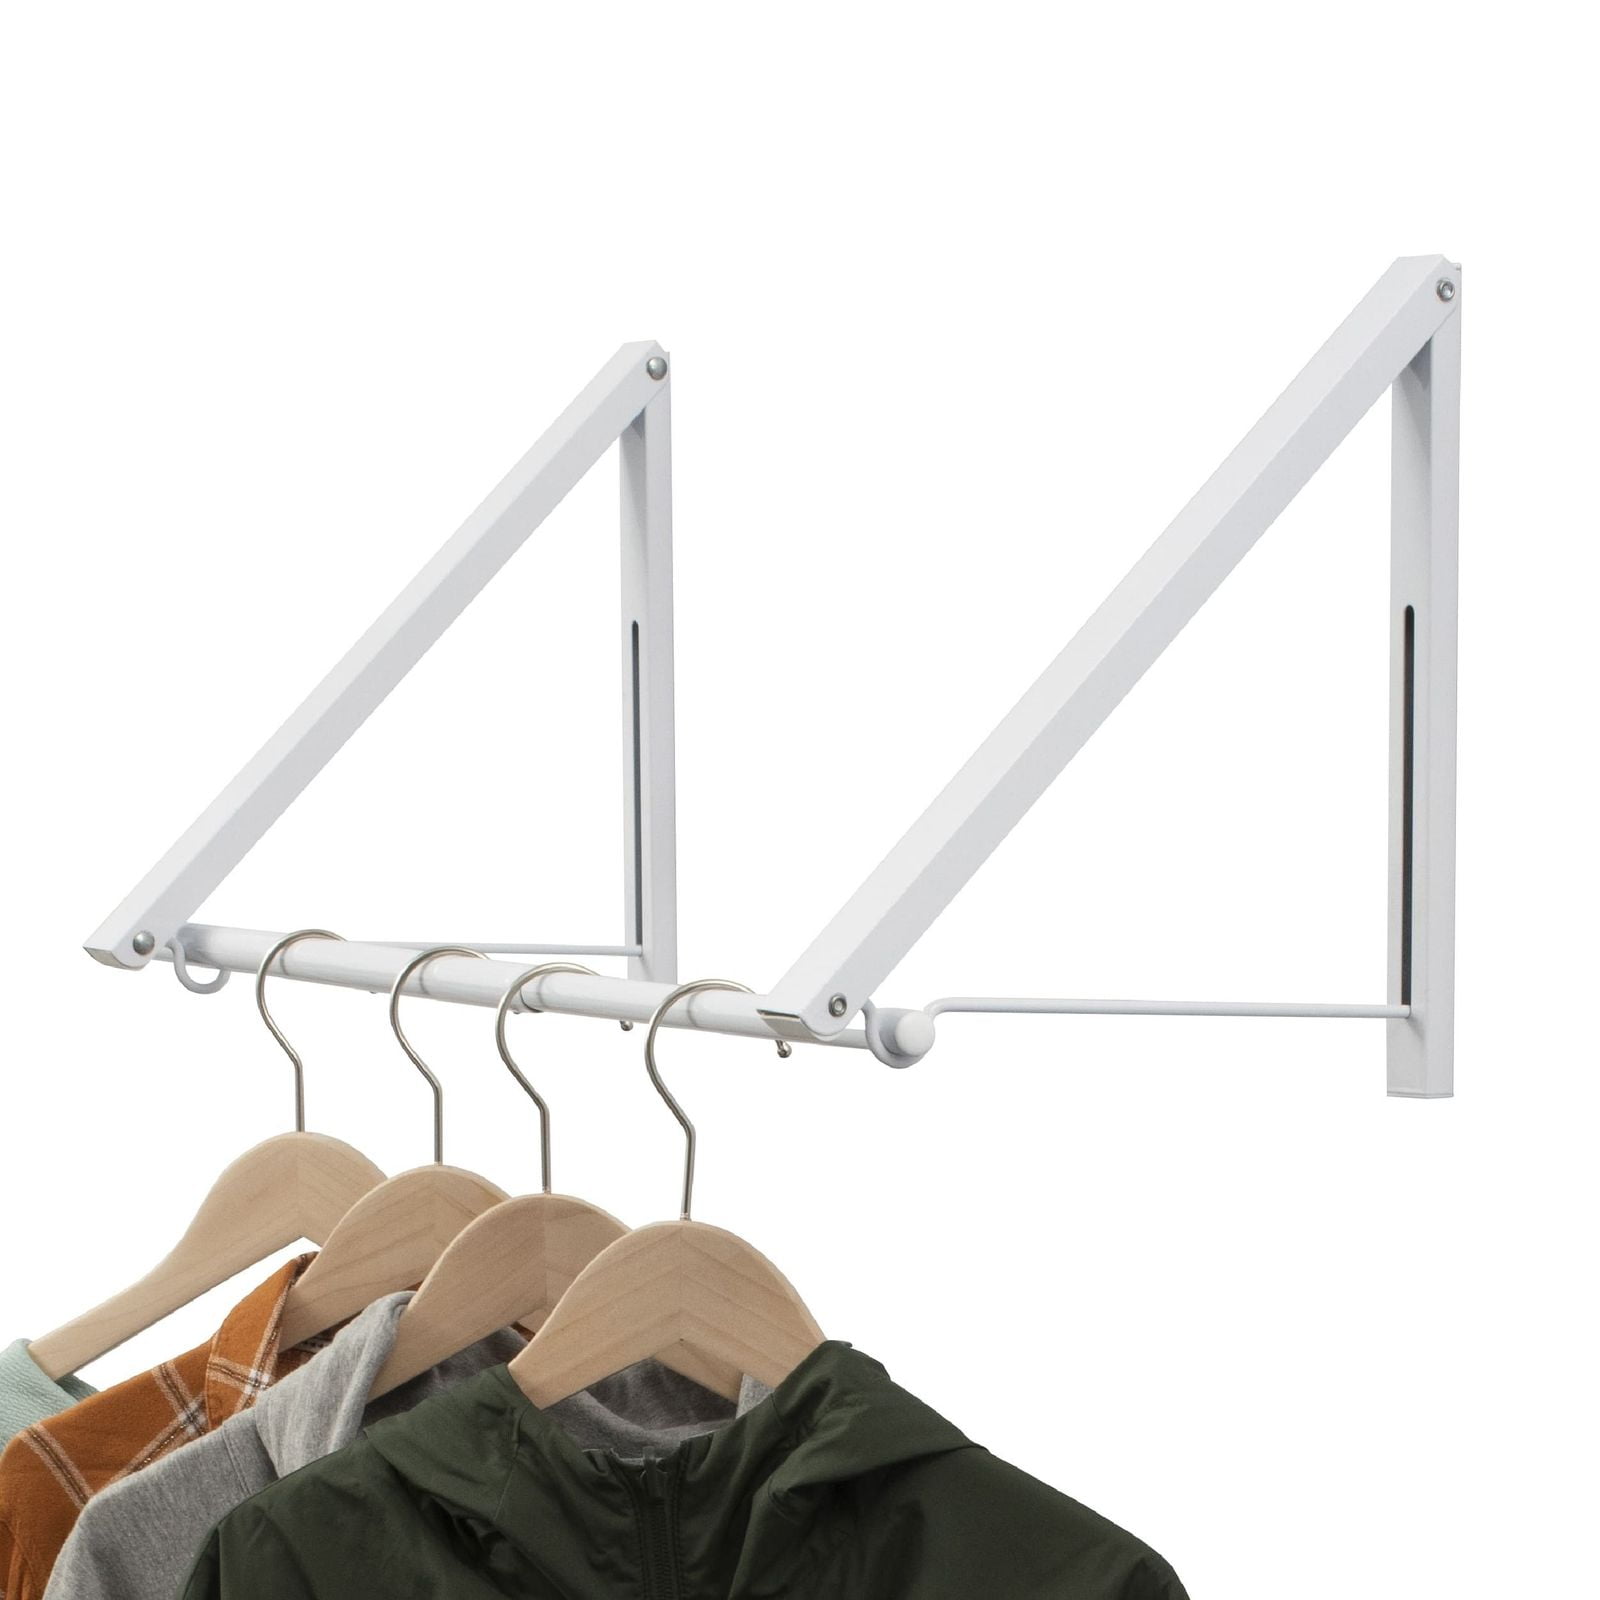 Indoor Balcony 5 Hole Clothes Hanging Drying Rack Window Frame Hanger Clever